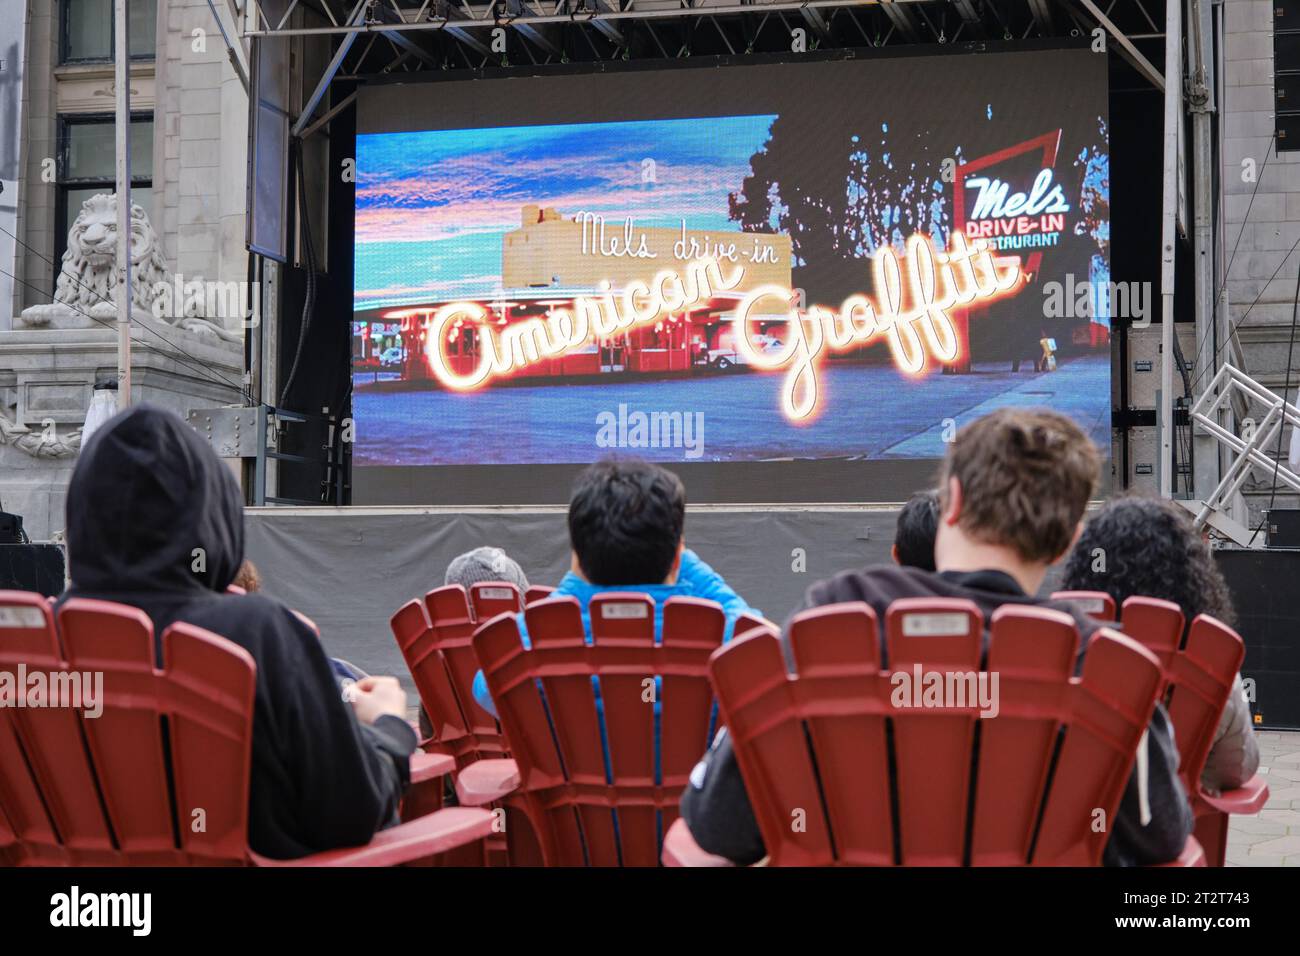 outdoor film projection of American Graffiti with people sitting on plastic Adirondack chairs Stock Photo